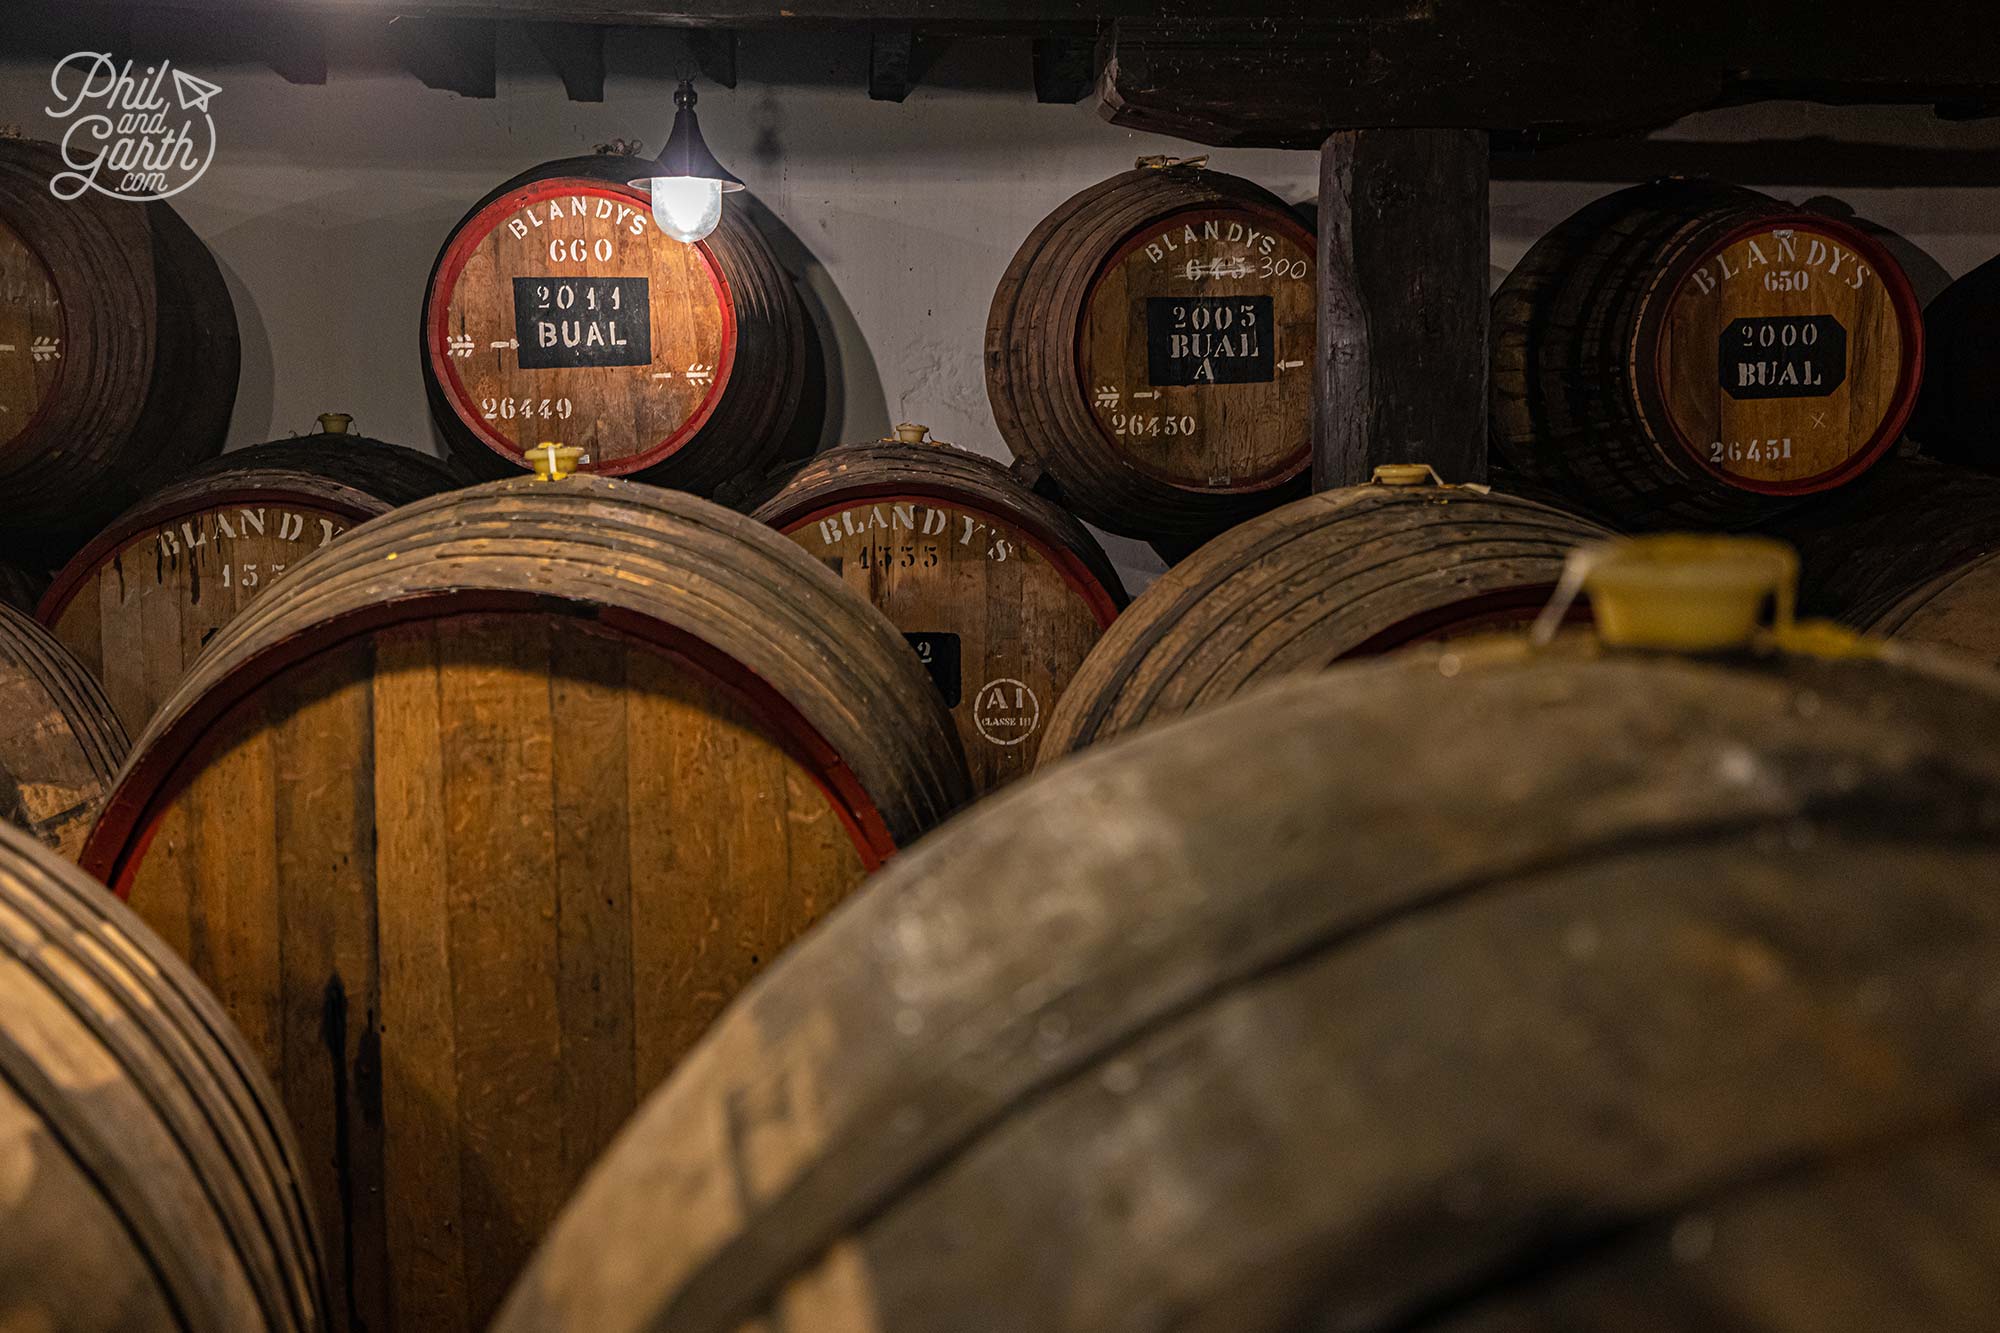 Some of the barrels are over 100 years old